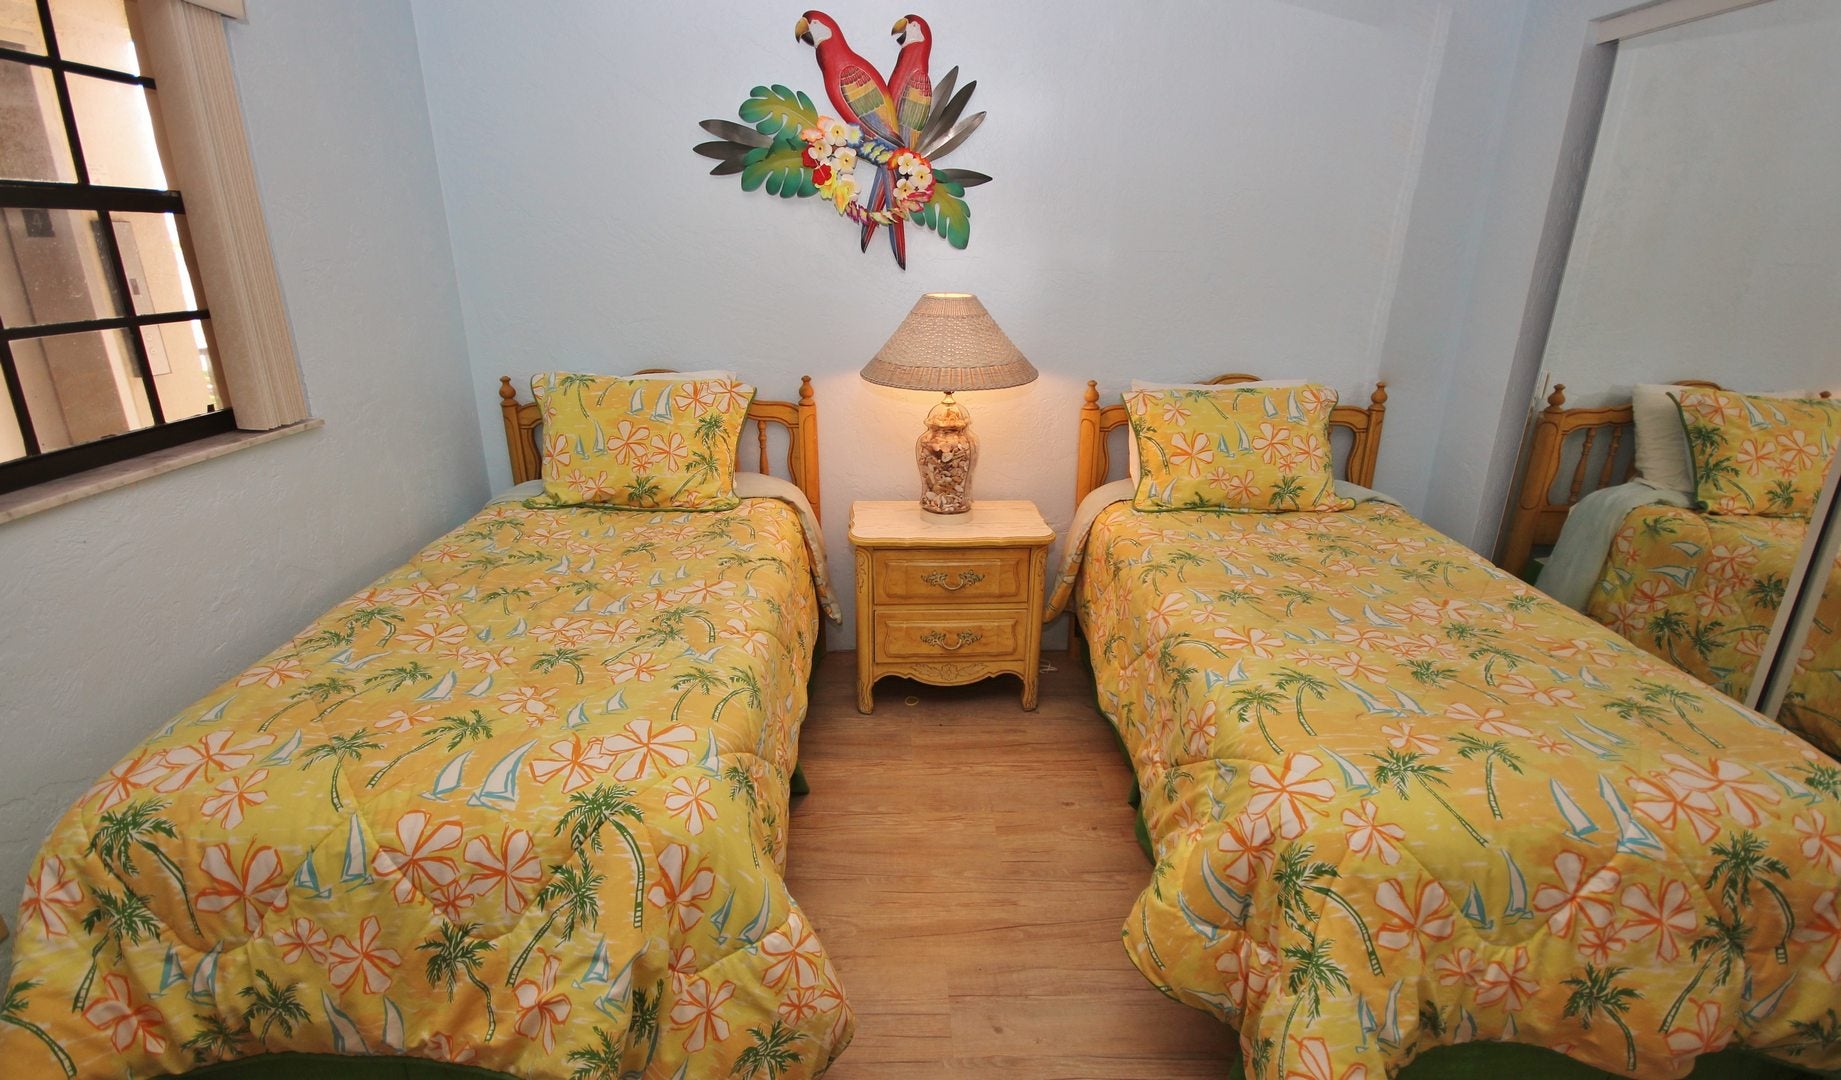 Tropical Theme in Second Bedroom